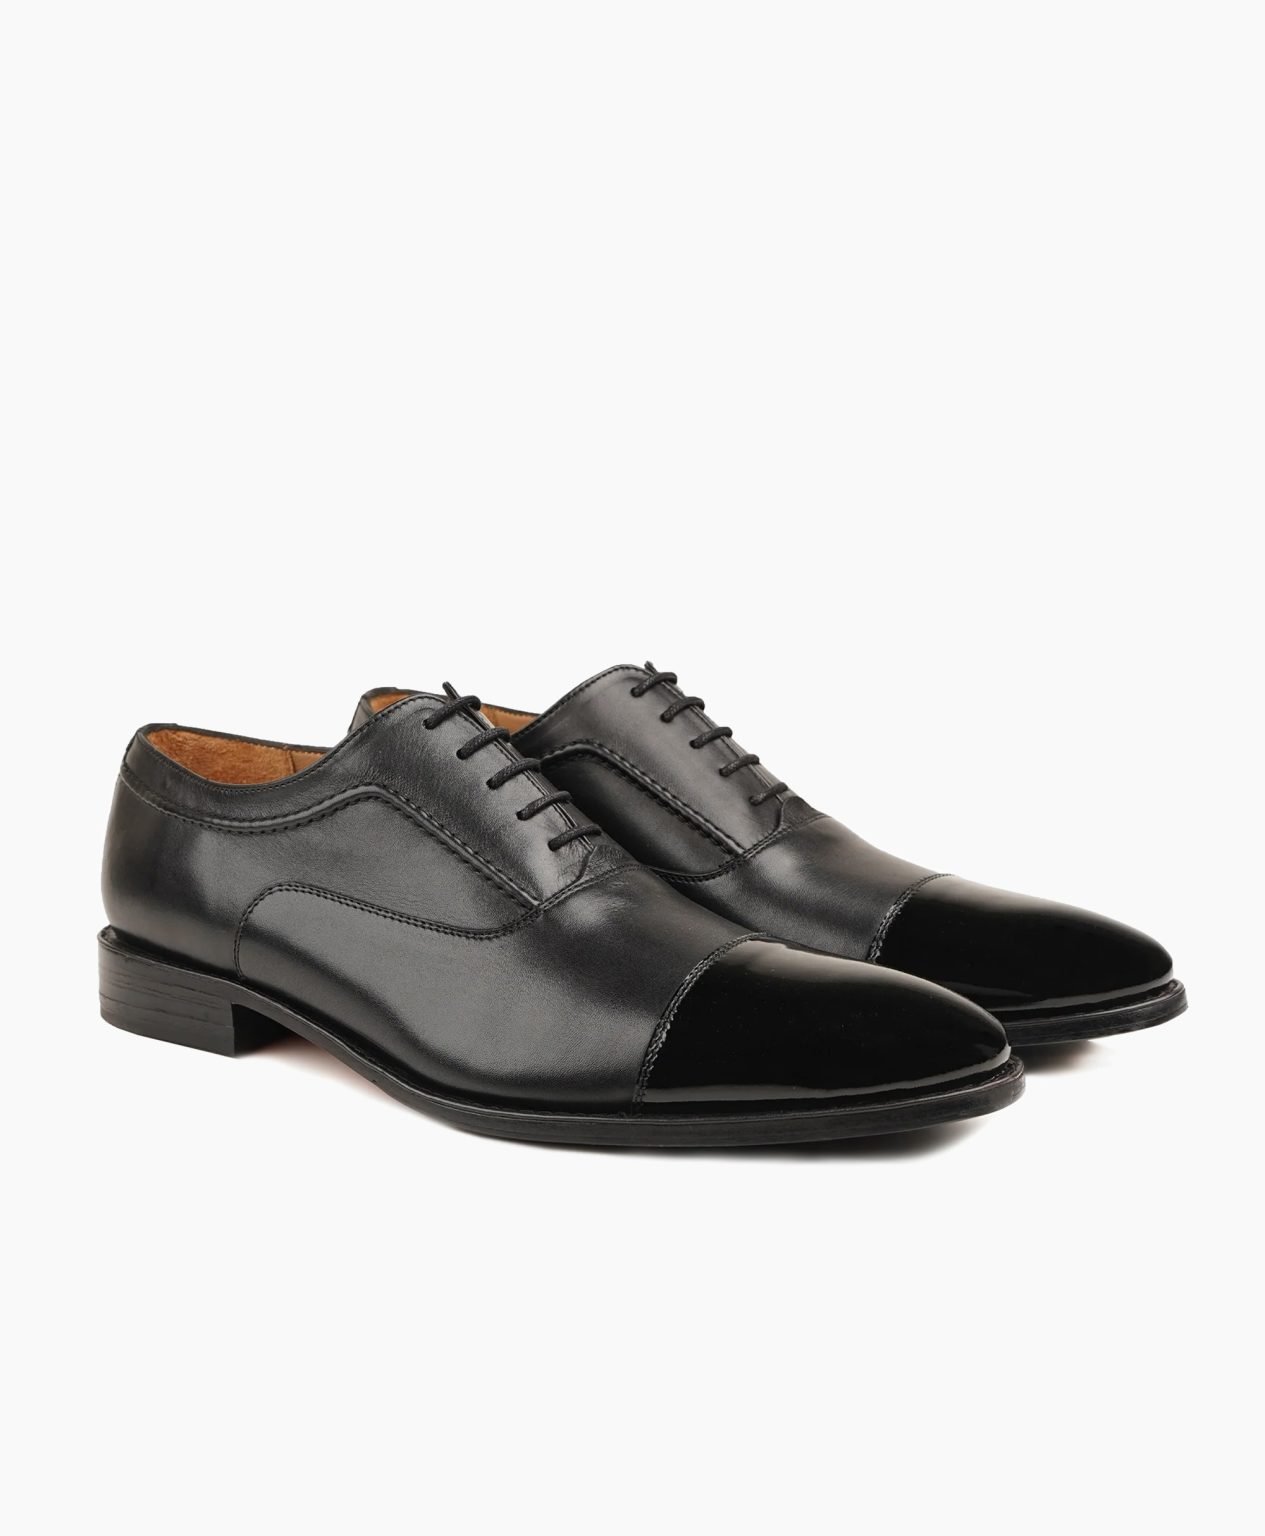 looe-oxford-black-with-patent-toe-cap-leather-shoes-image200